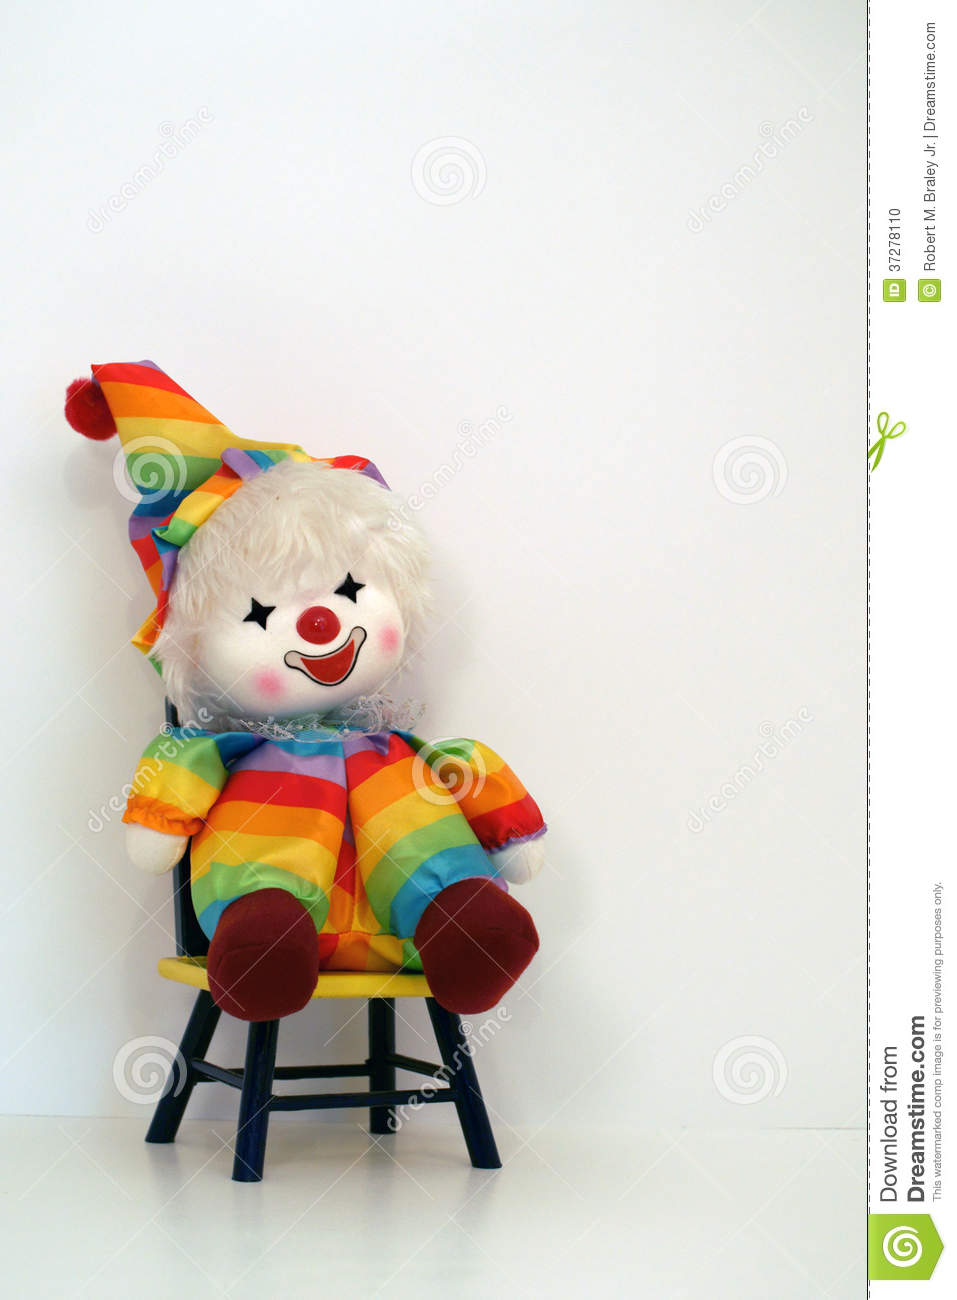 Clown Doll Sitting On A Time Out Chair Stock Photo   Image  37278110